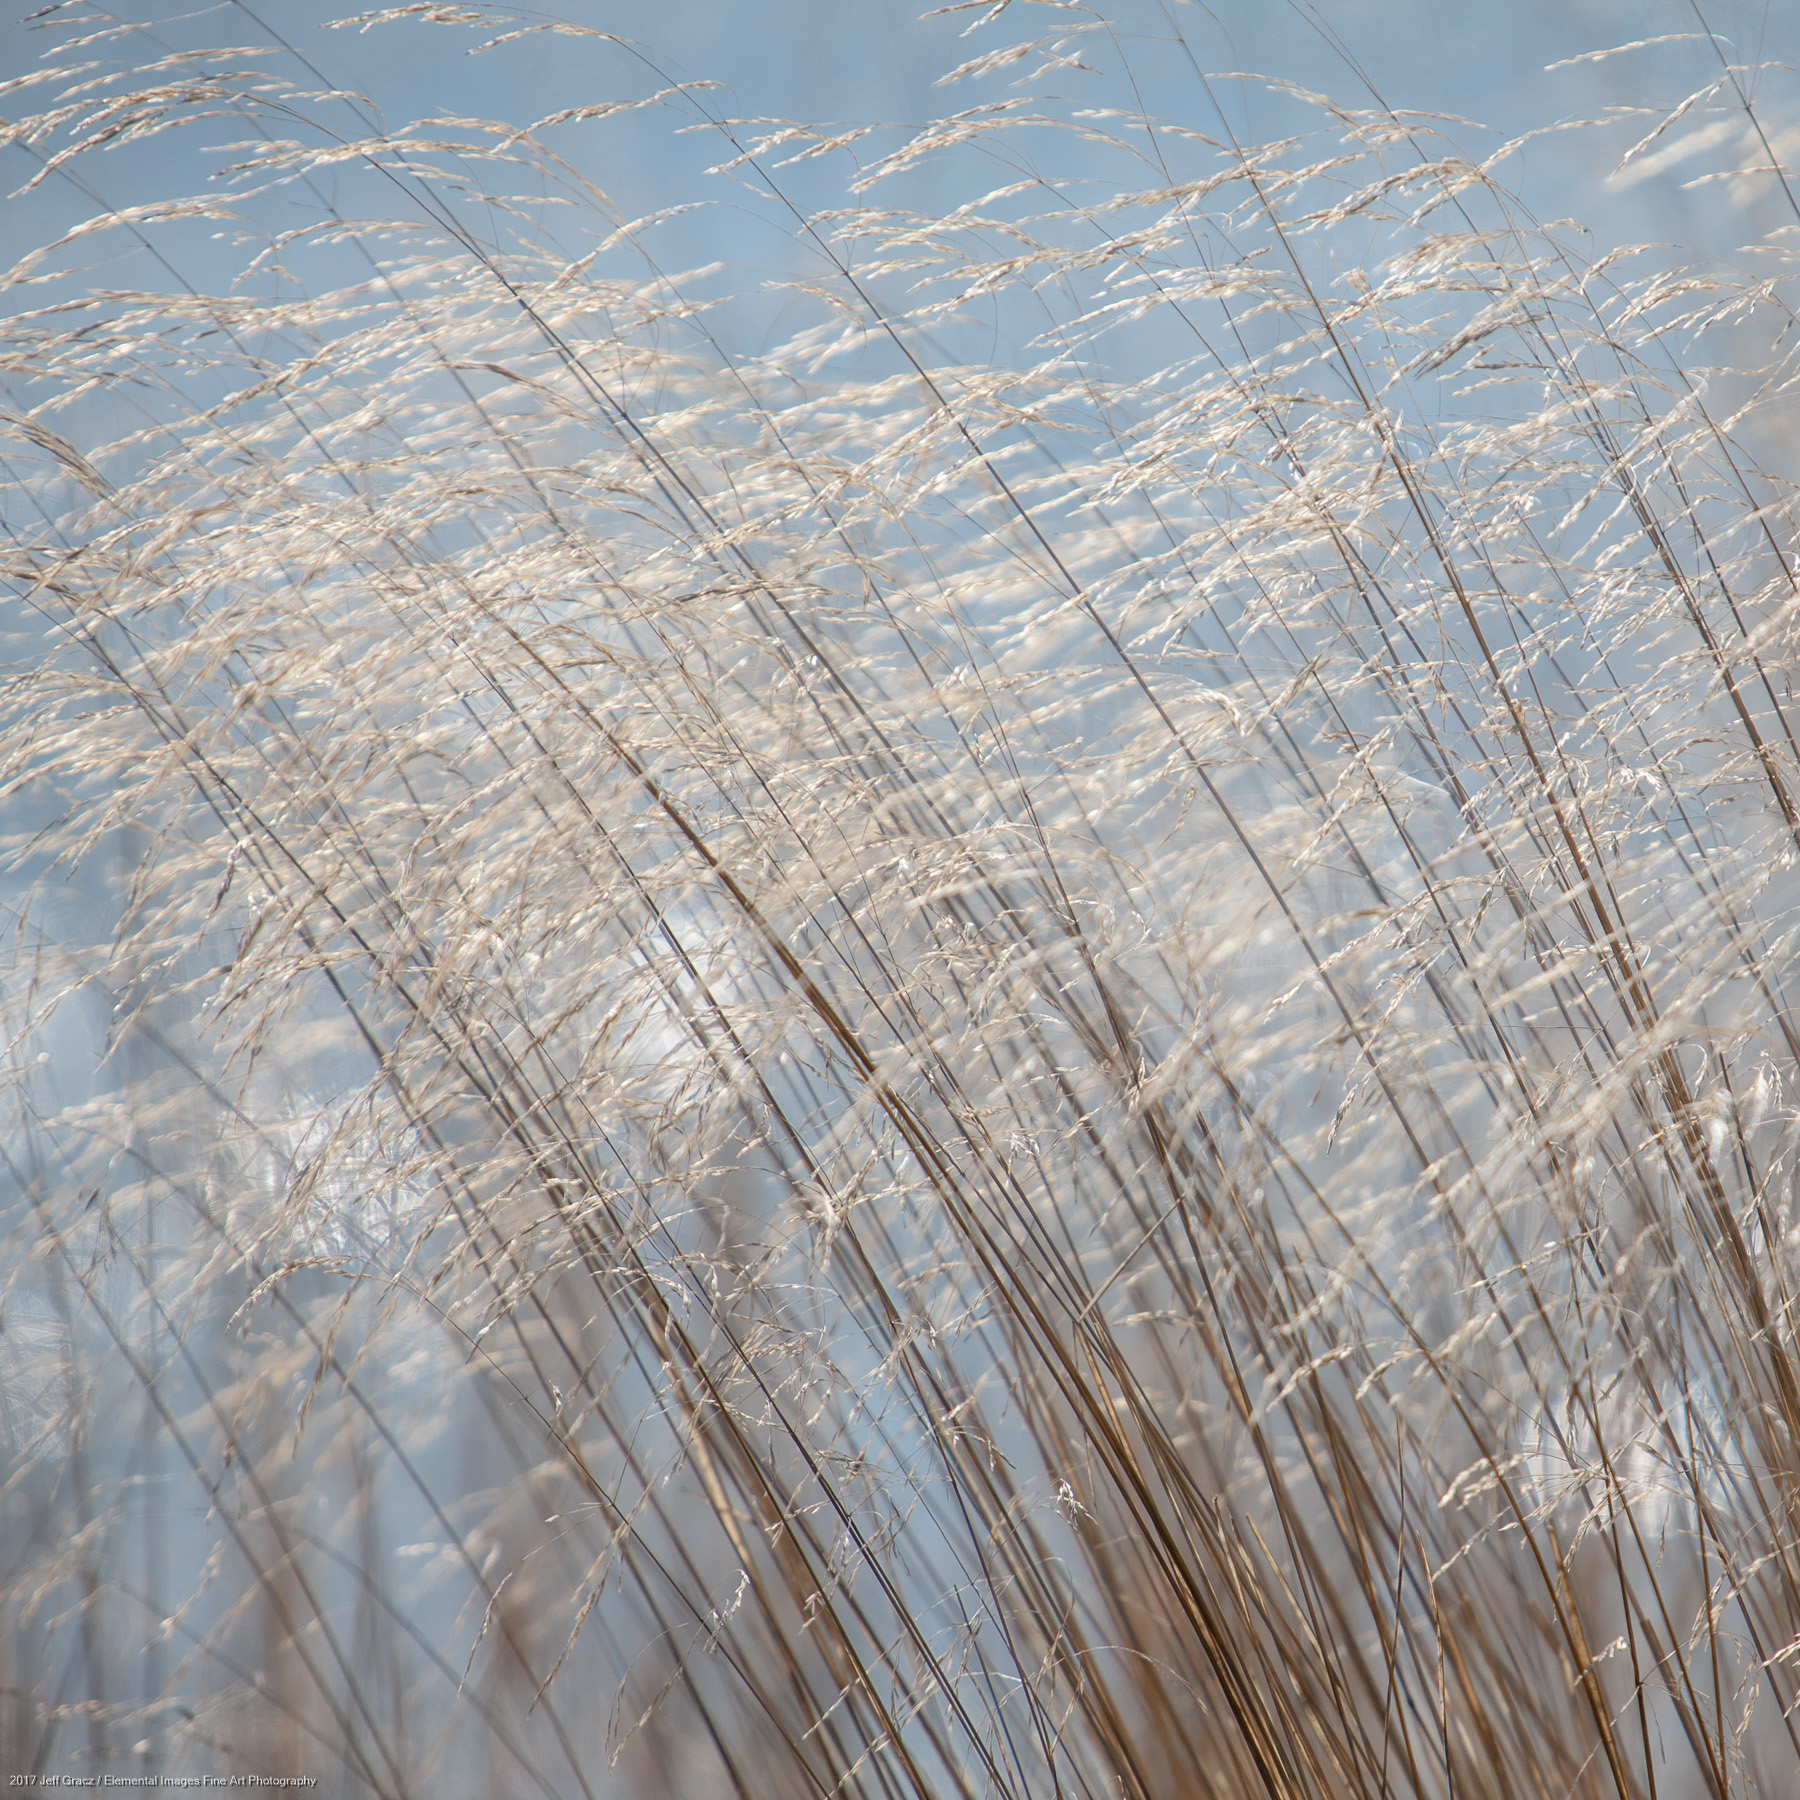 Grasses #165 | Three Rocks | OR | USA - © 2017 Jeff Gracz / Elemental Images Fine Art Photography - All Rights Reserved Worldwide